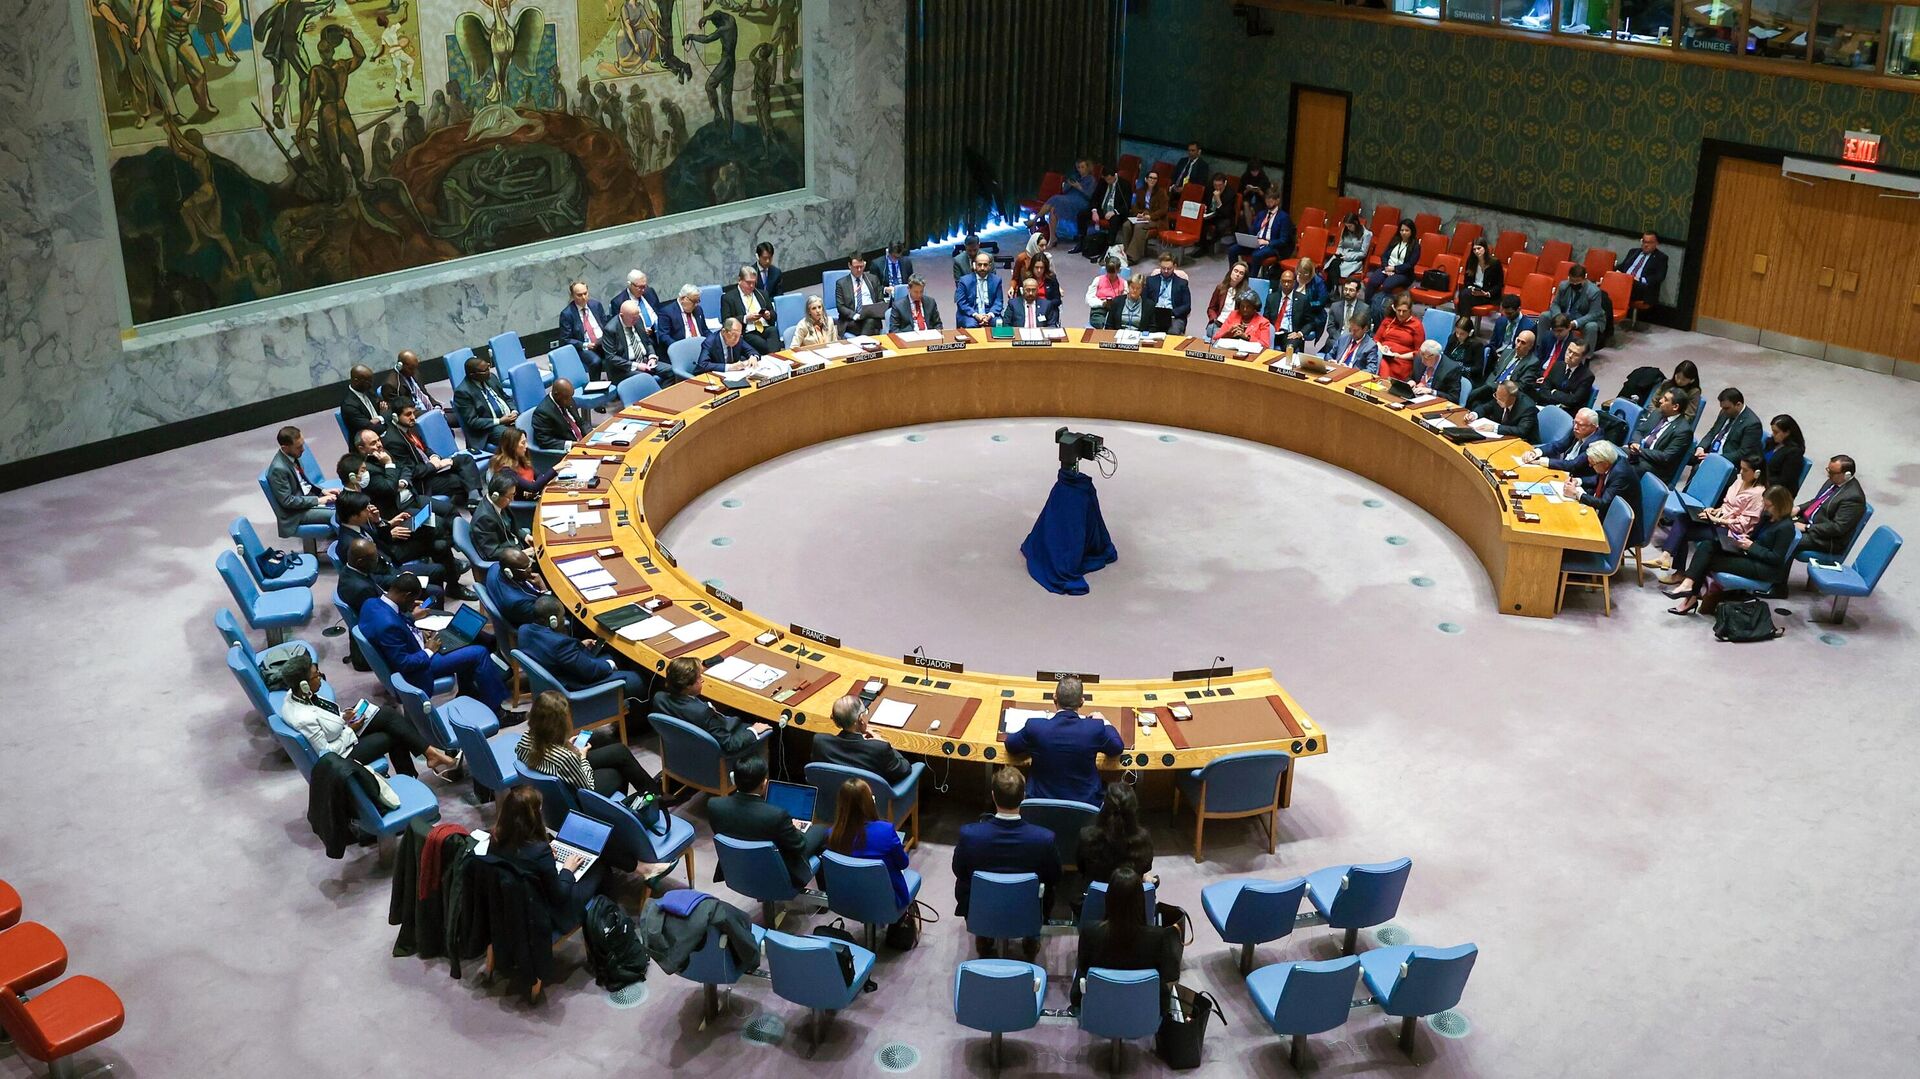 The Belarusian Ministry of Foreign Affairs advocated the expansion of the category of permanent members of the UN Security Council